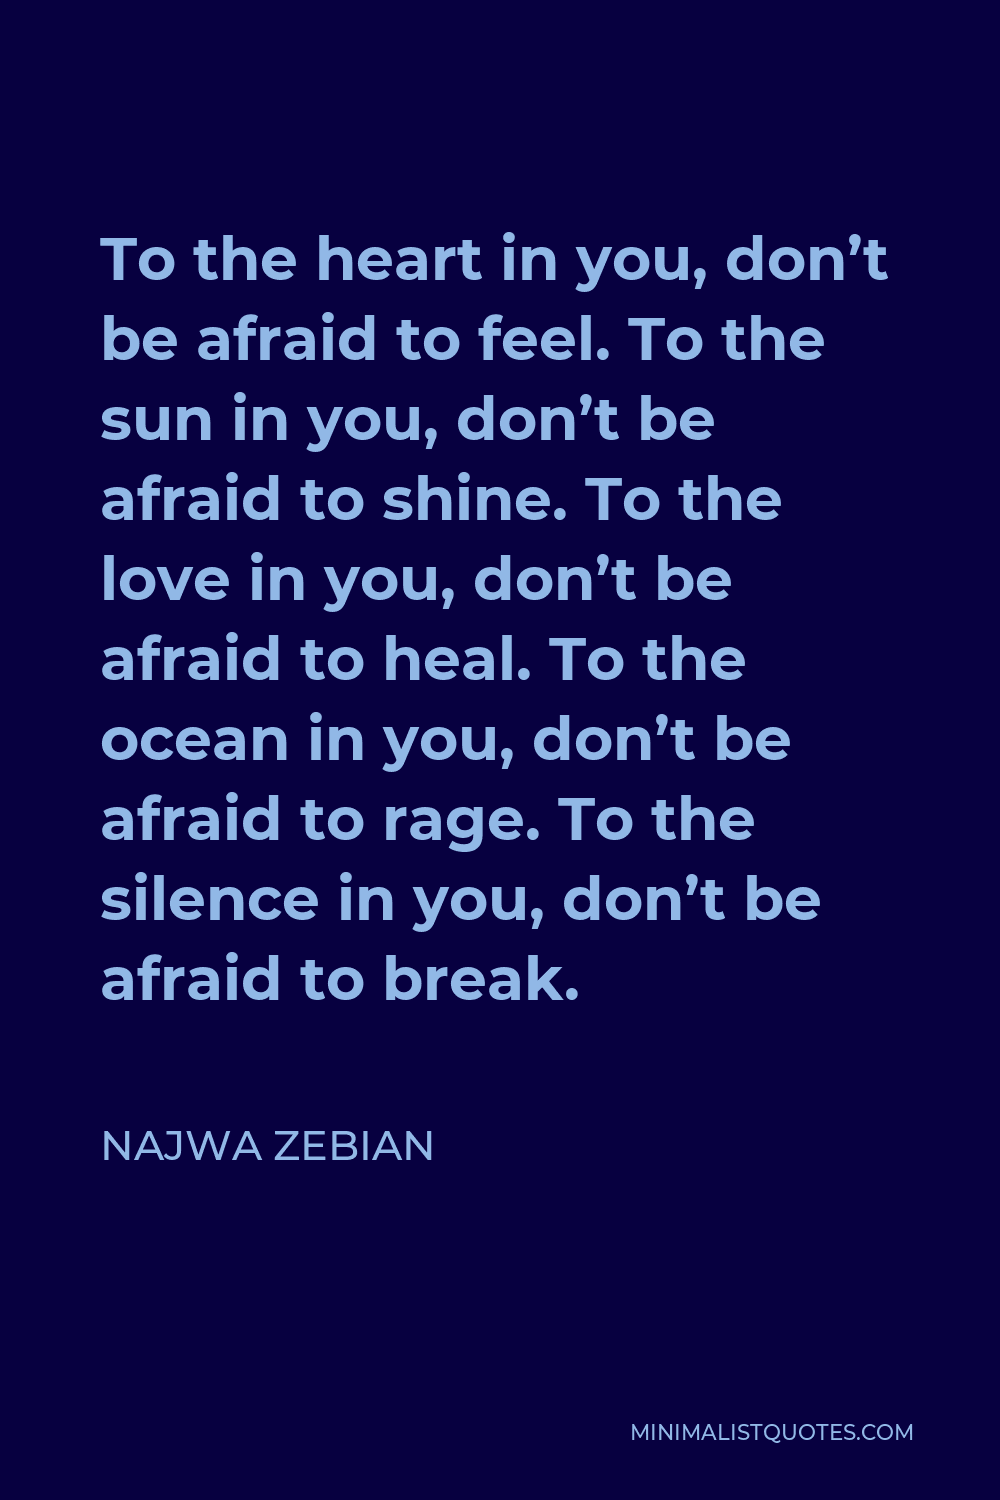 Najwa Zebian Quote - To the heart in you, don’t be afraid to feel. To the sun in you, don’t be afraid to shine. To the love in you, don’t be afraid to heal. To the ocean in you, don’t be afraid to rage. To the silence in you, don’t be afraid to break.